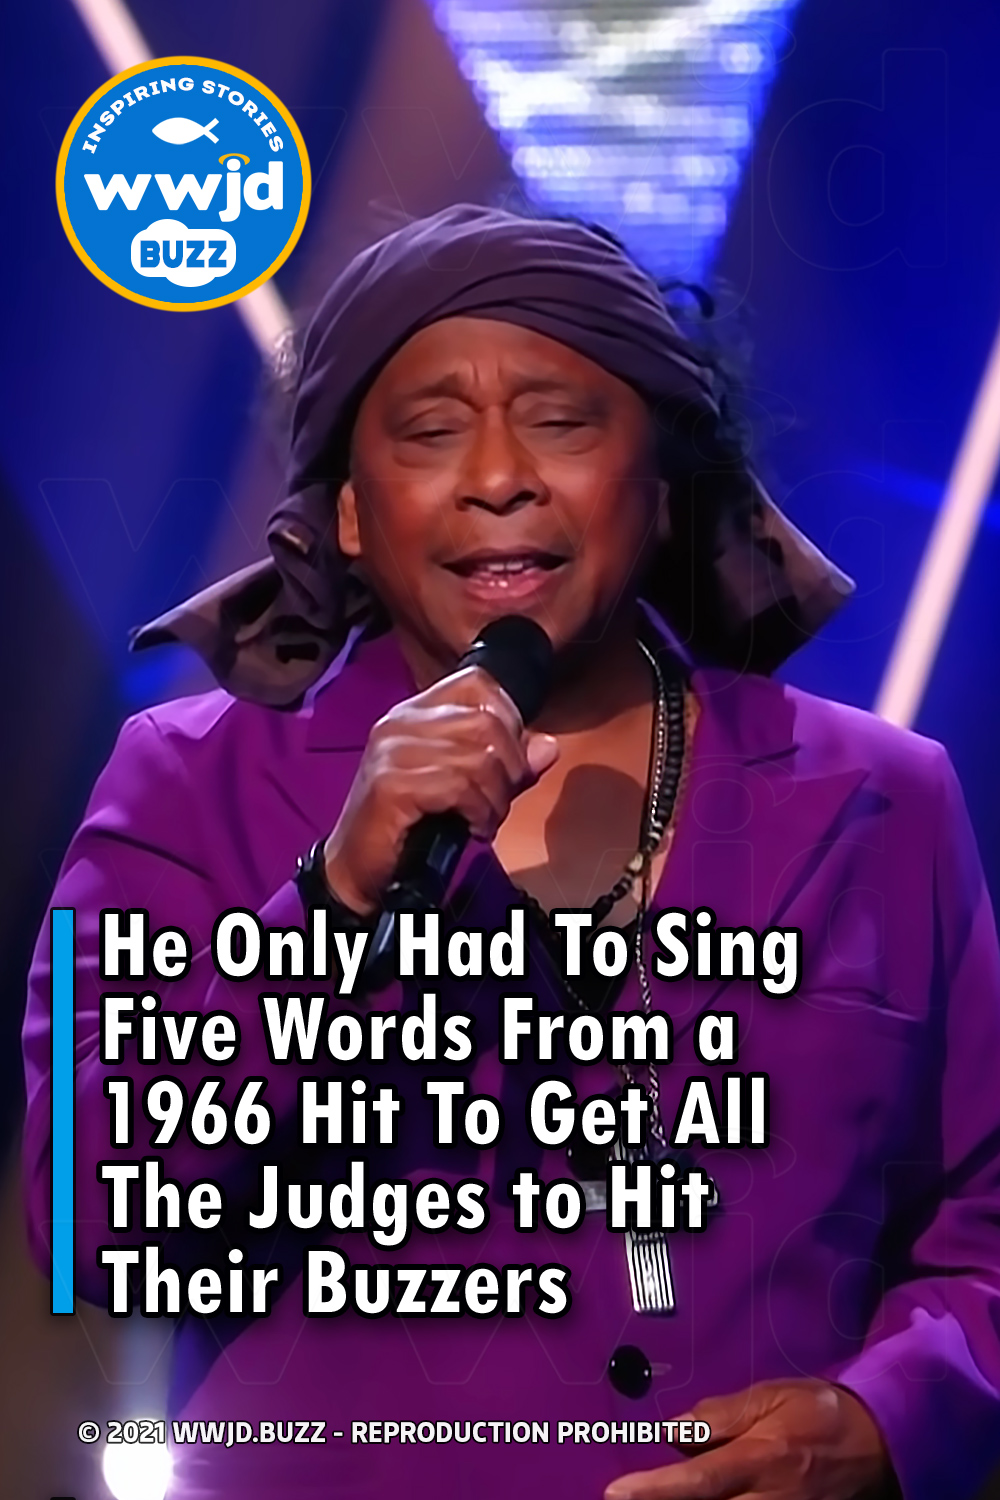 He Only Had To Sing Five Words From a 1966 Hit To Get All The Judges to Hit Their Buzzers